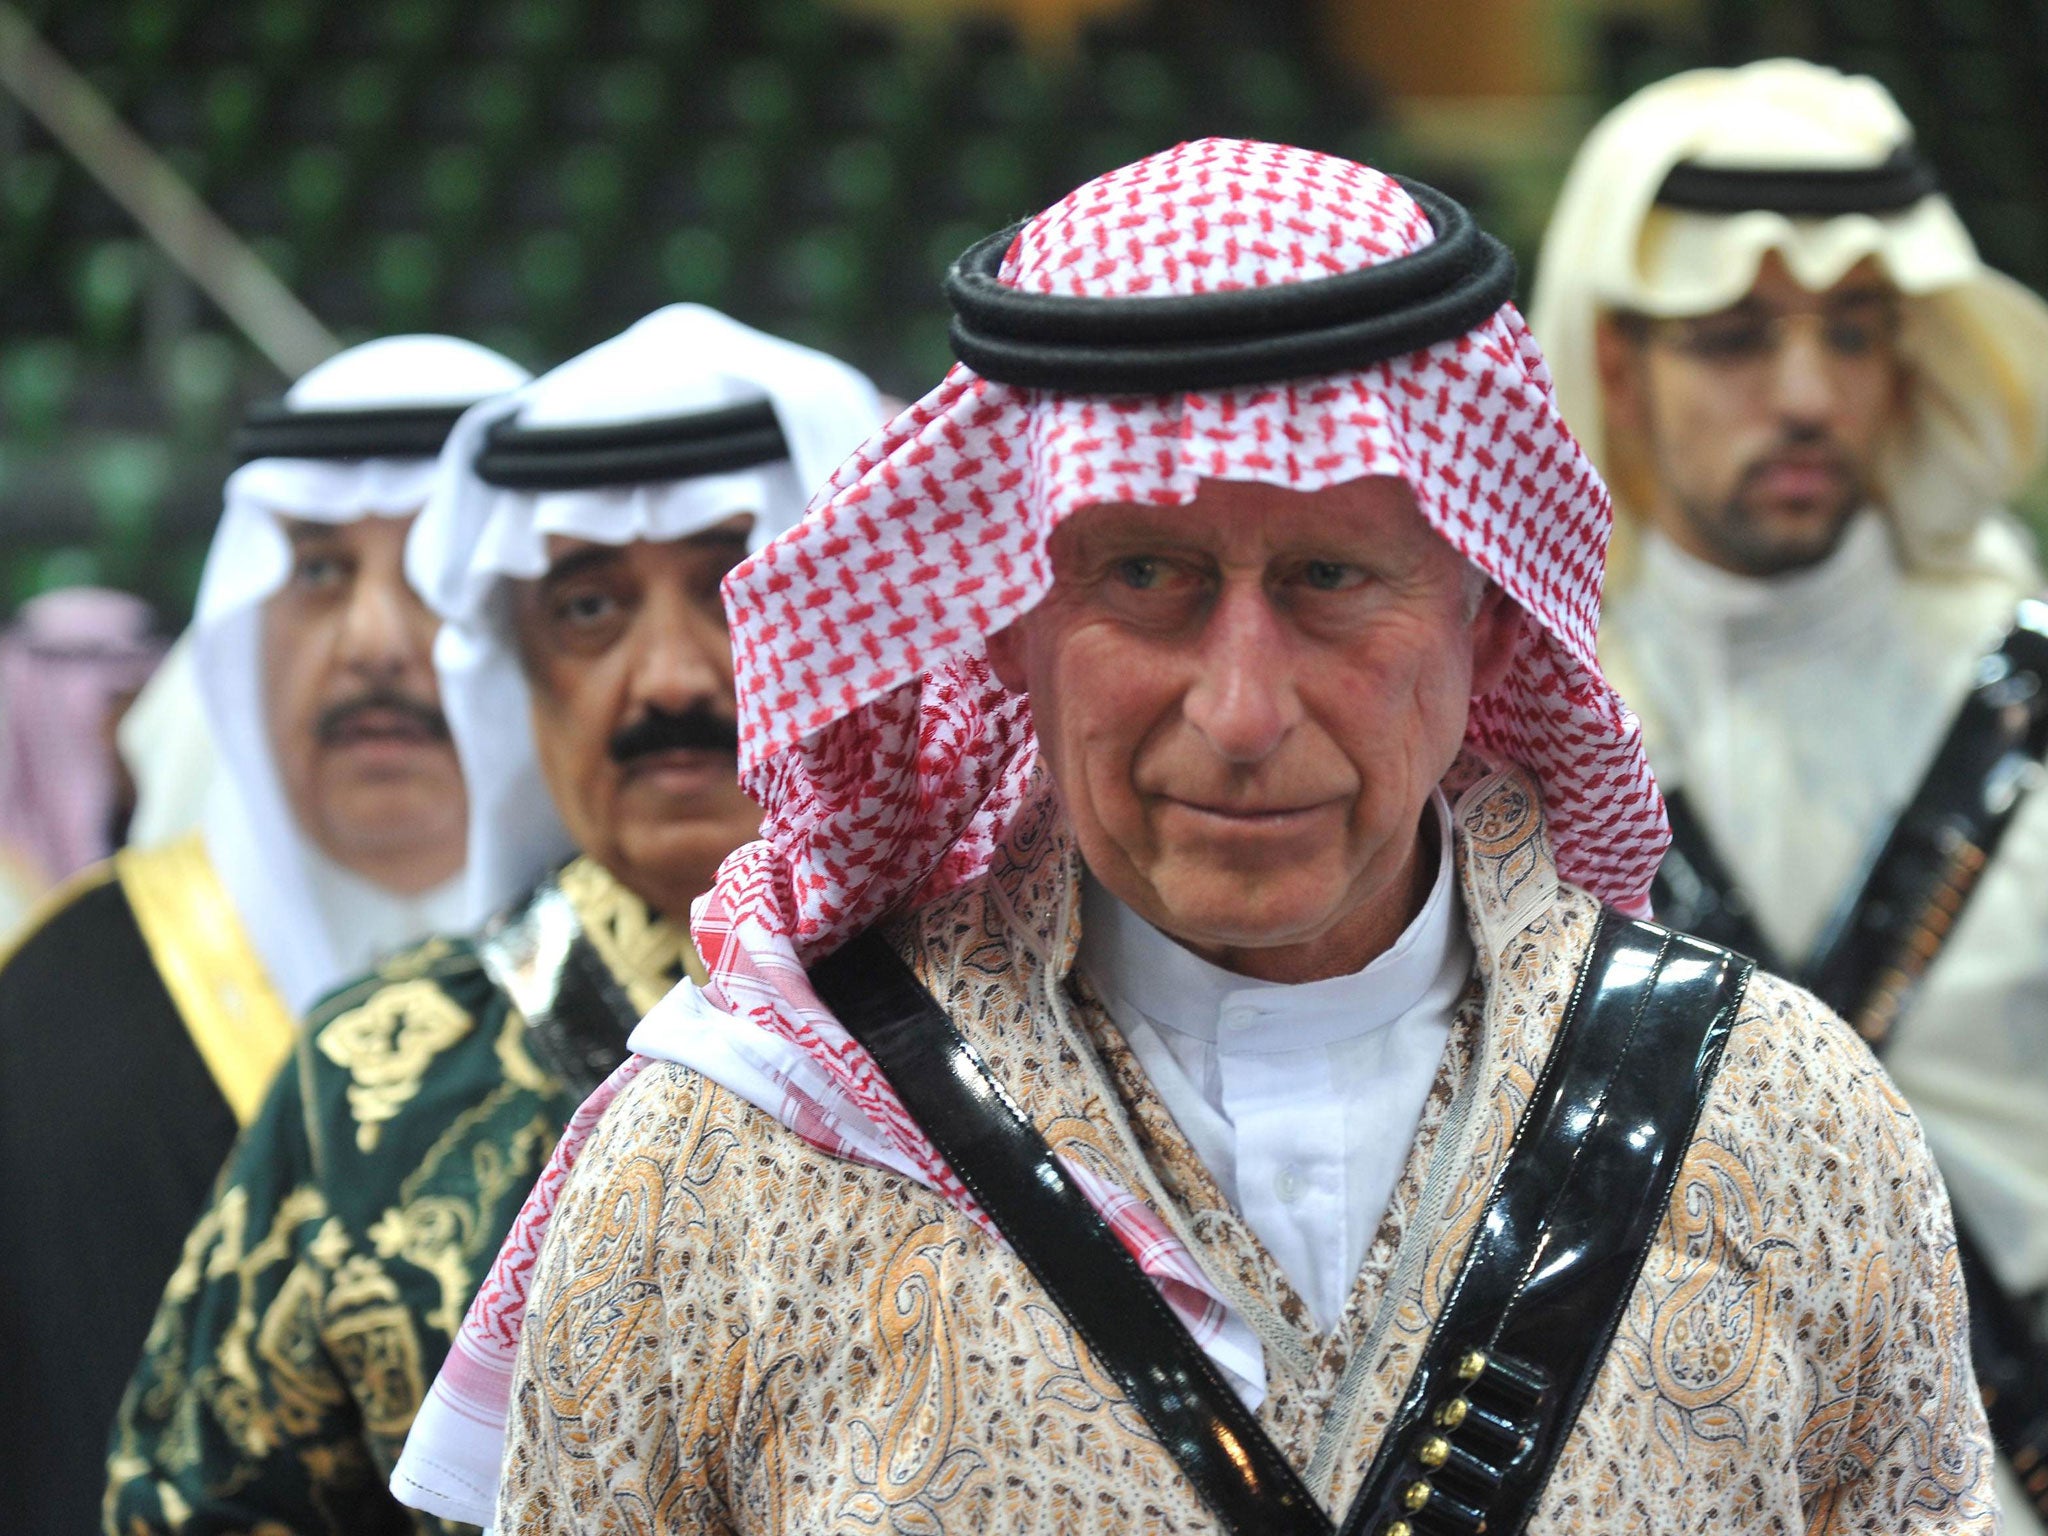 Prince Charles arrived in Saudi Arabia on a private visit in 2013